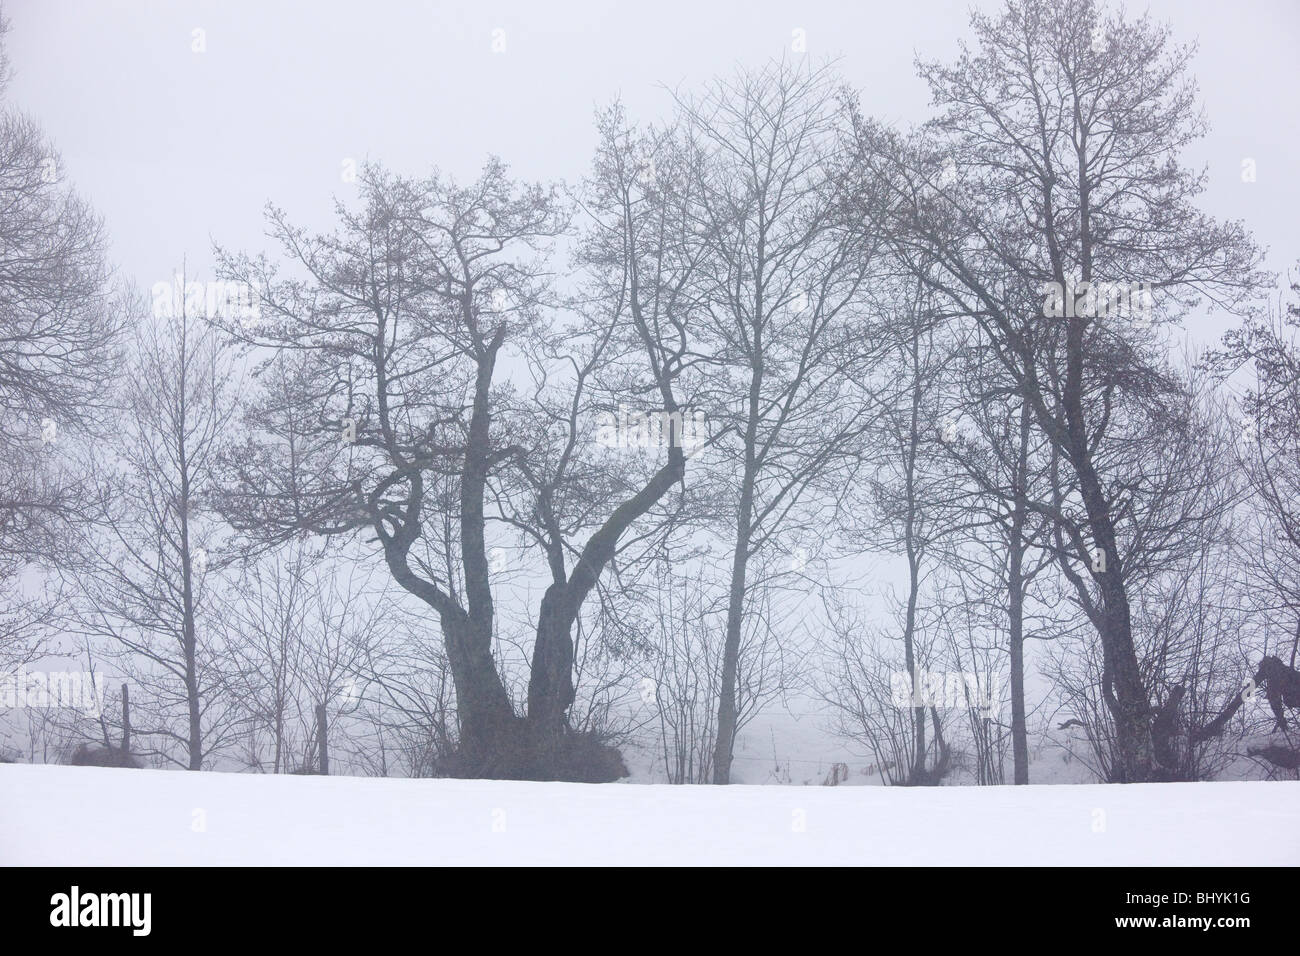 Silhouettes of Common Alders and other trees in midwinter snow, in the Volcans d'Auvergne Regional Natural Park, France Stock Photo